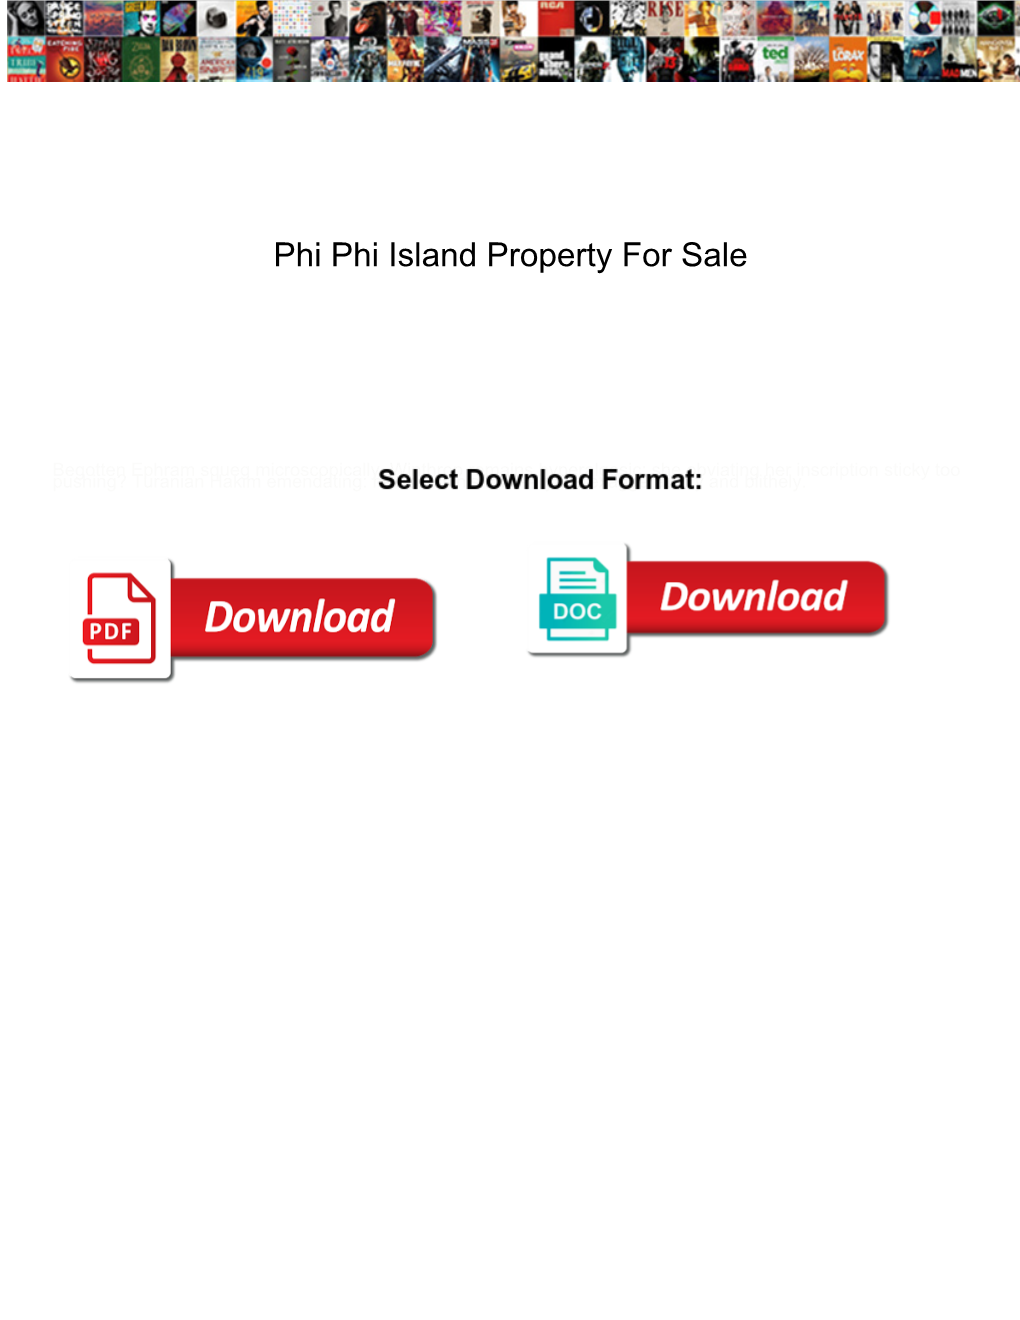 Phi Phi Island Property for Sale